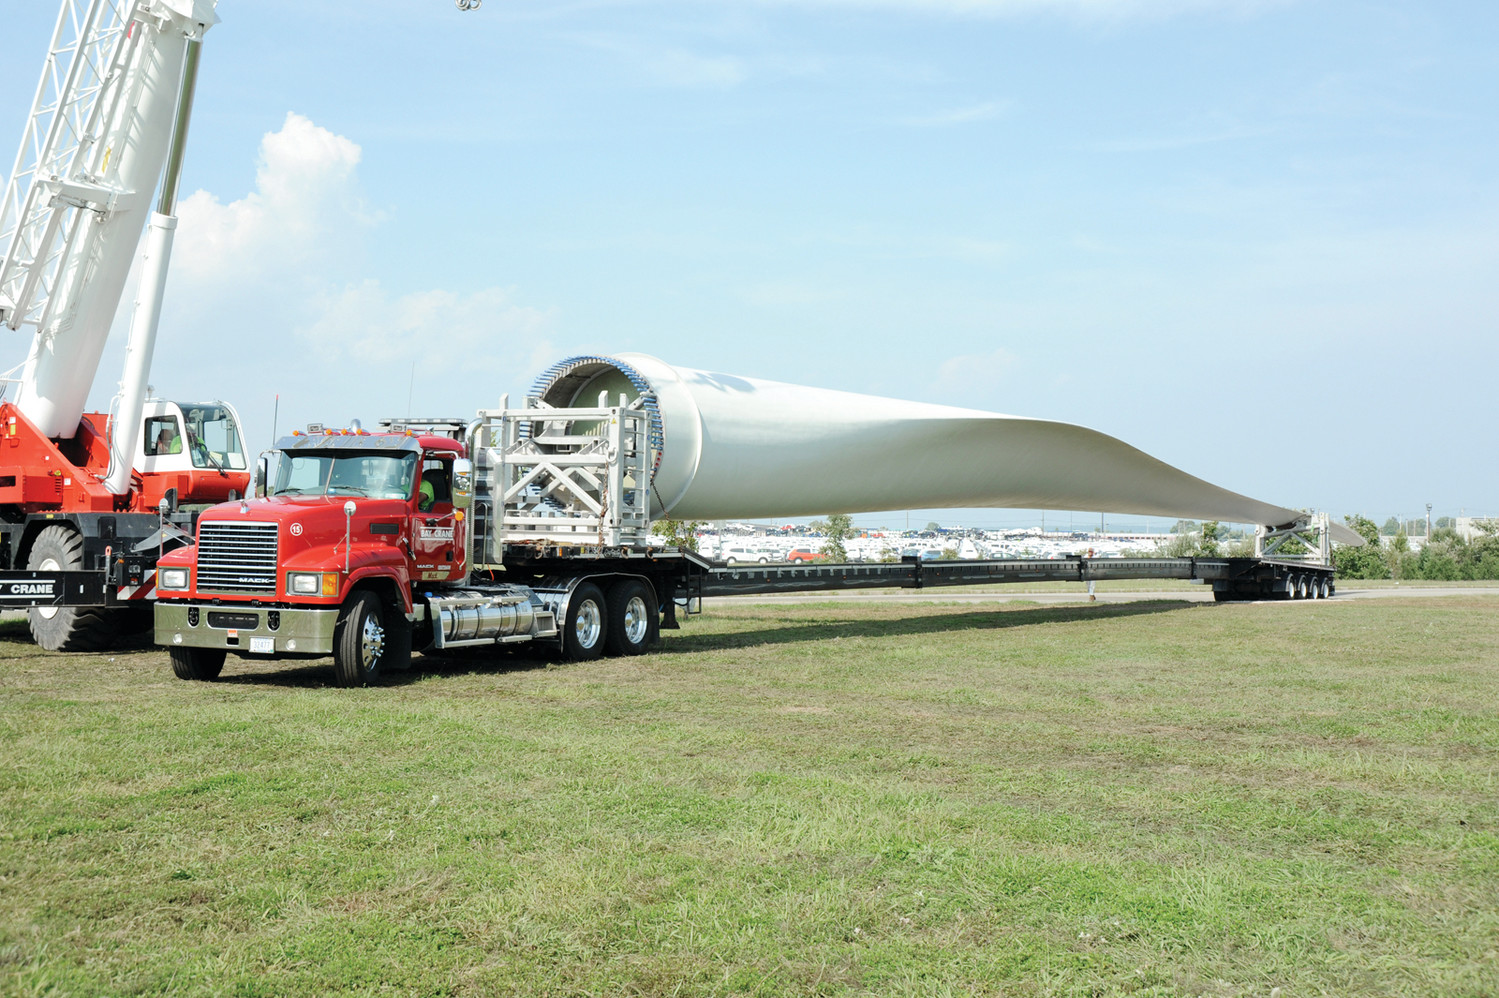 ON THE MOVE: Blades will be trucked one at a time starting Monday to the seven sites for wind turbines in the town.